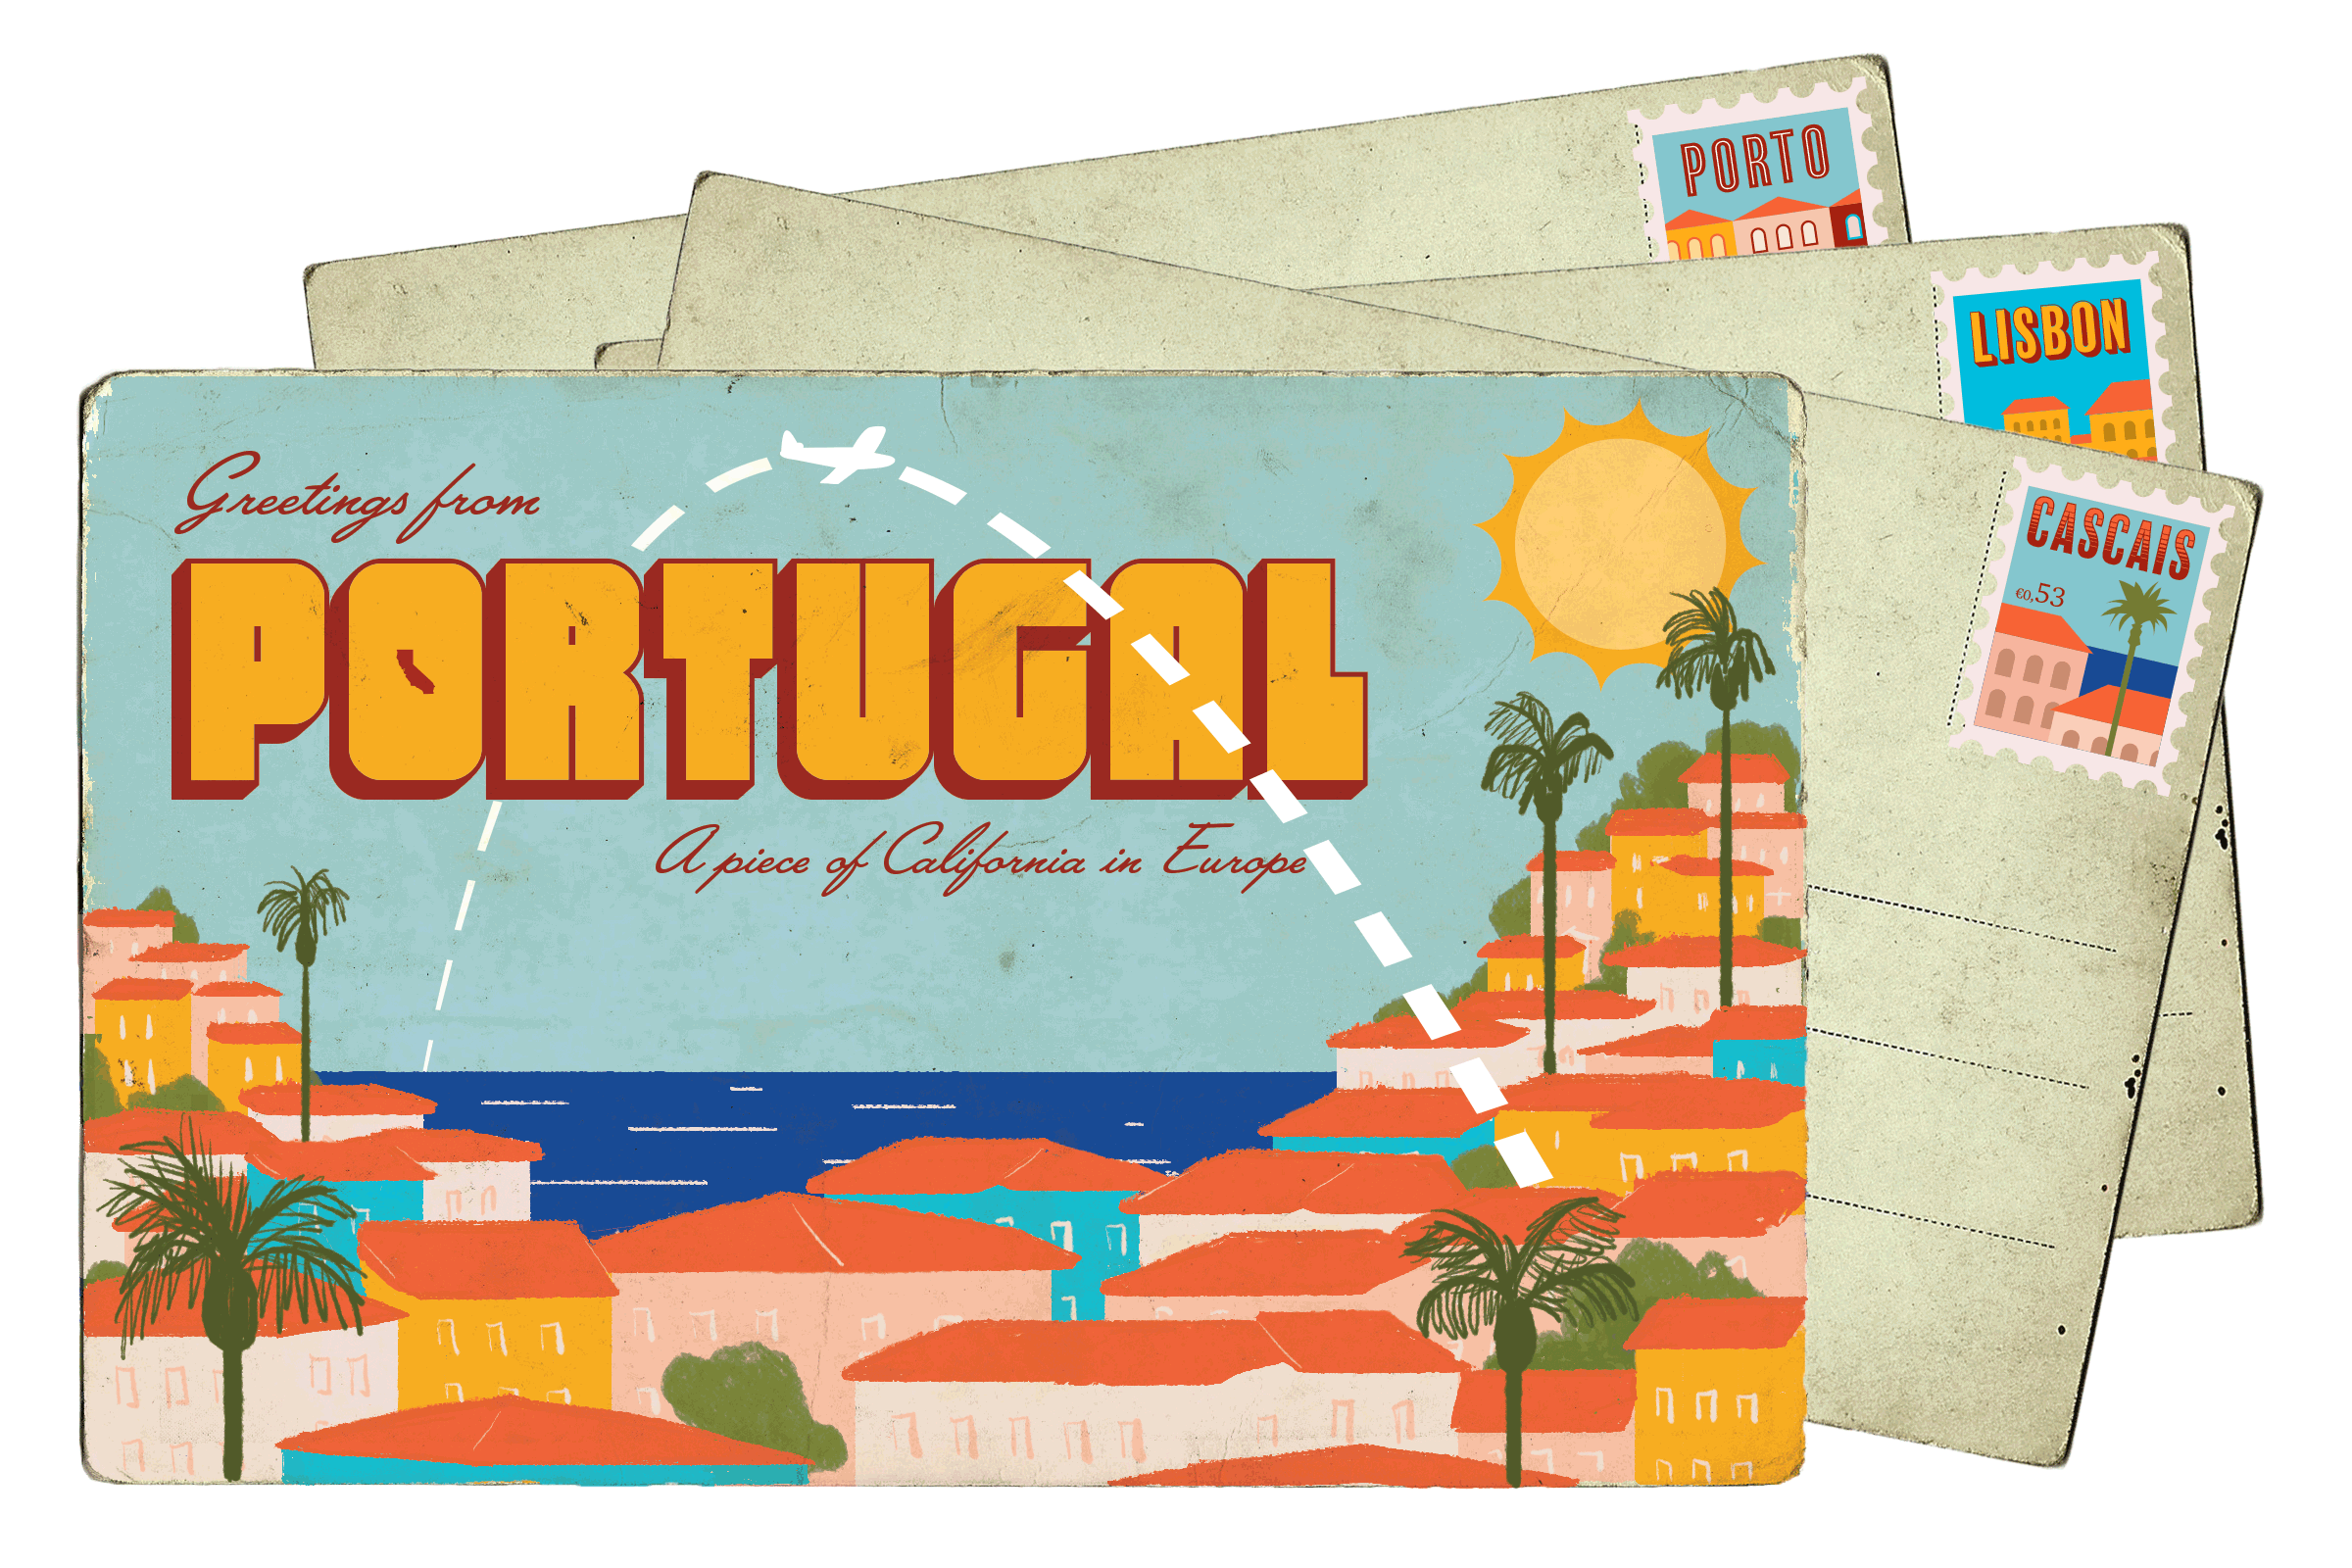 postcard showing a colorful coastal town and the words "Greetings from Portugal, a piece of California in Europe"